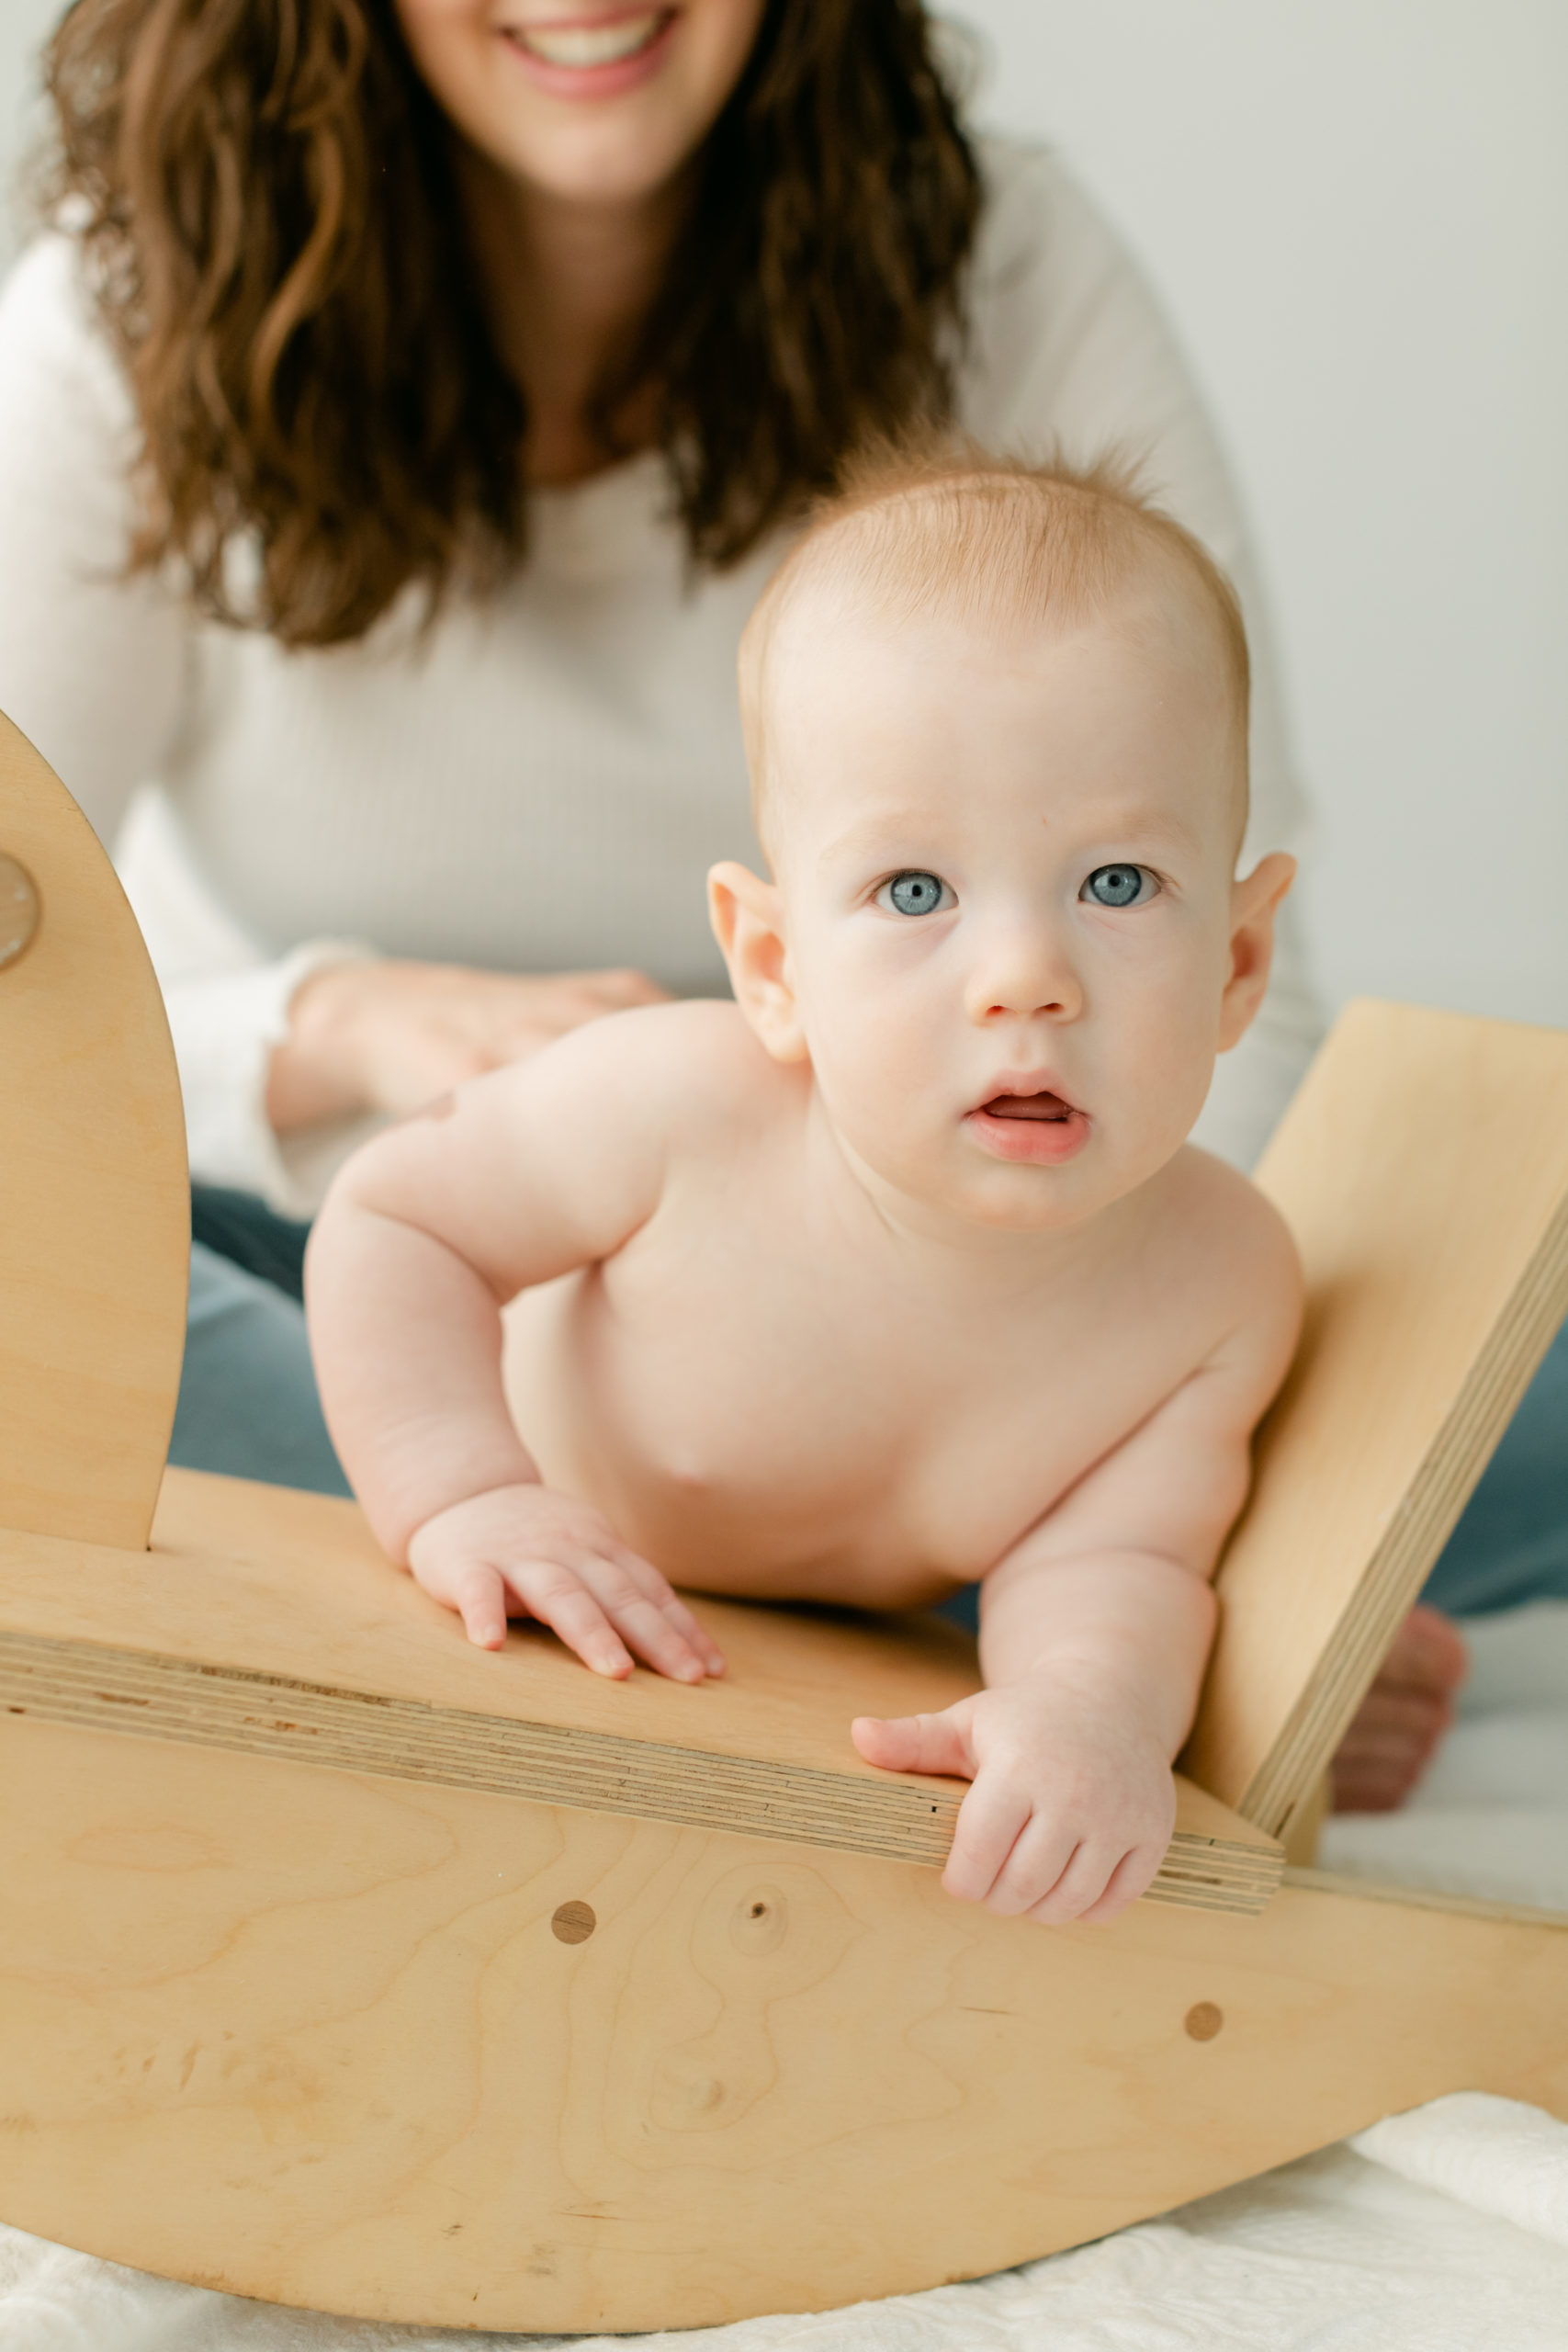 6 month old baby boy with blue eyes leaning on wooden rocking horse.